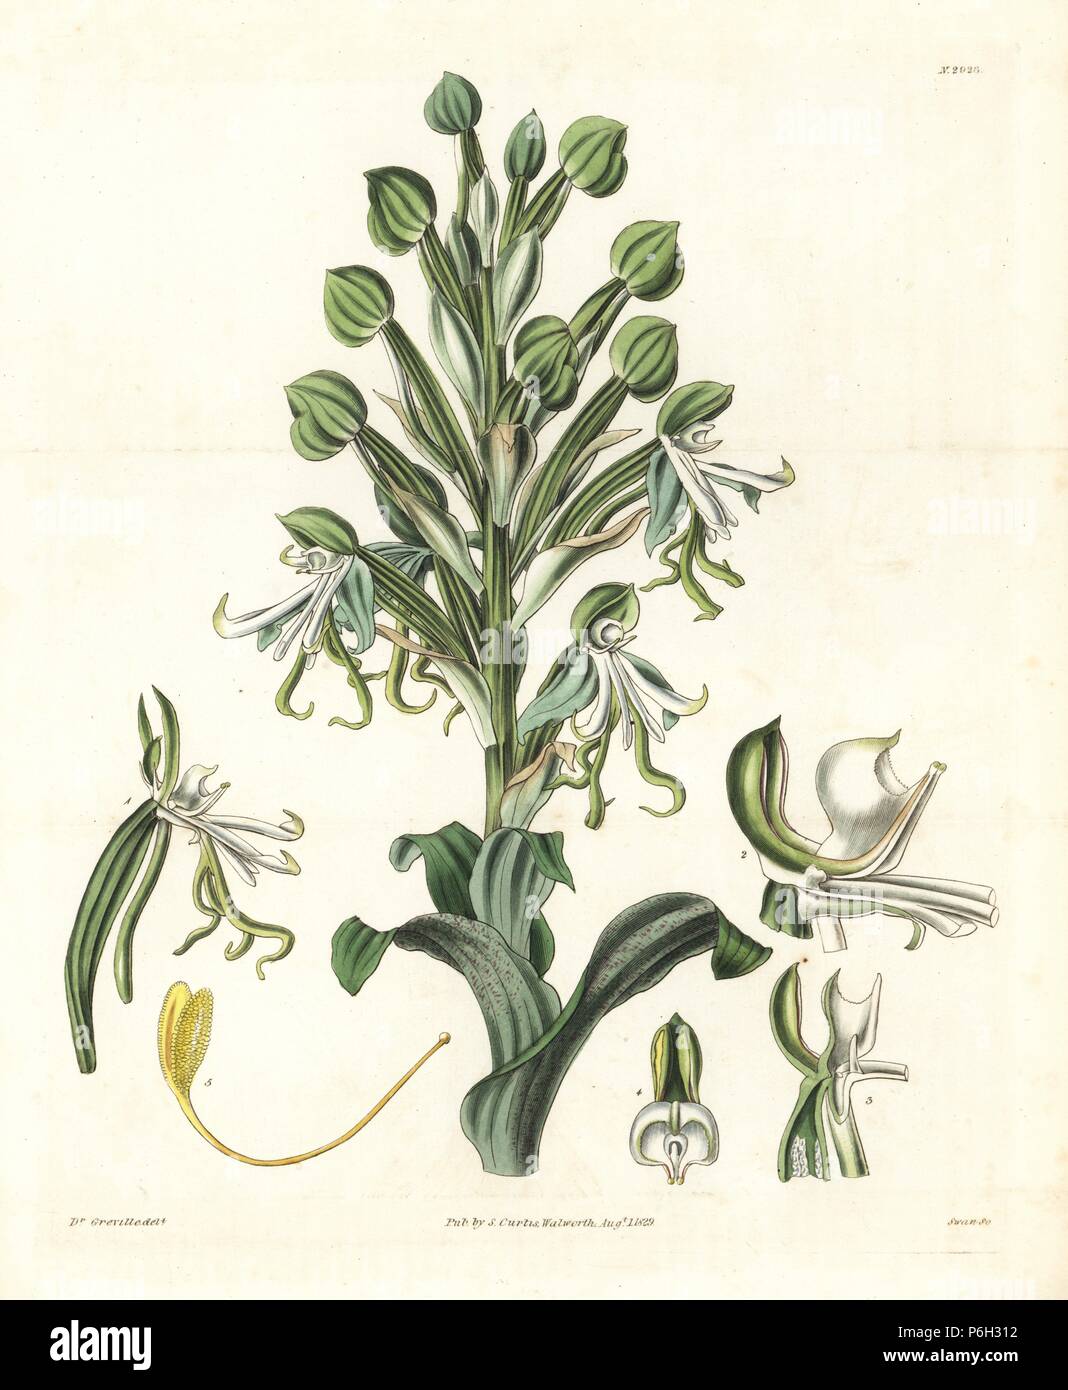 Beautiful or showy bonatea orchid, Bonatea speciosa. Handcoloured copperplate engraving by Swan after an illustration by Dr. Greville from Samuel Curtis's 'Botanical Magazine,' London, 1829. Stock Photo